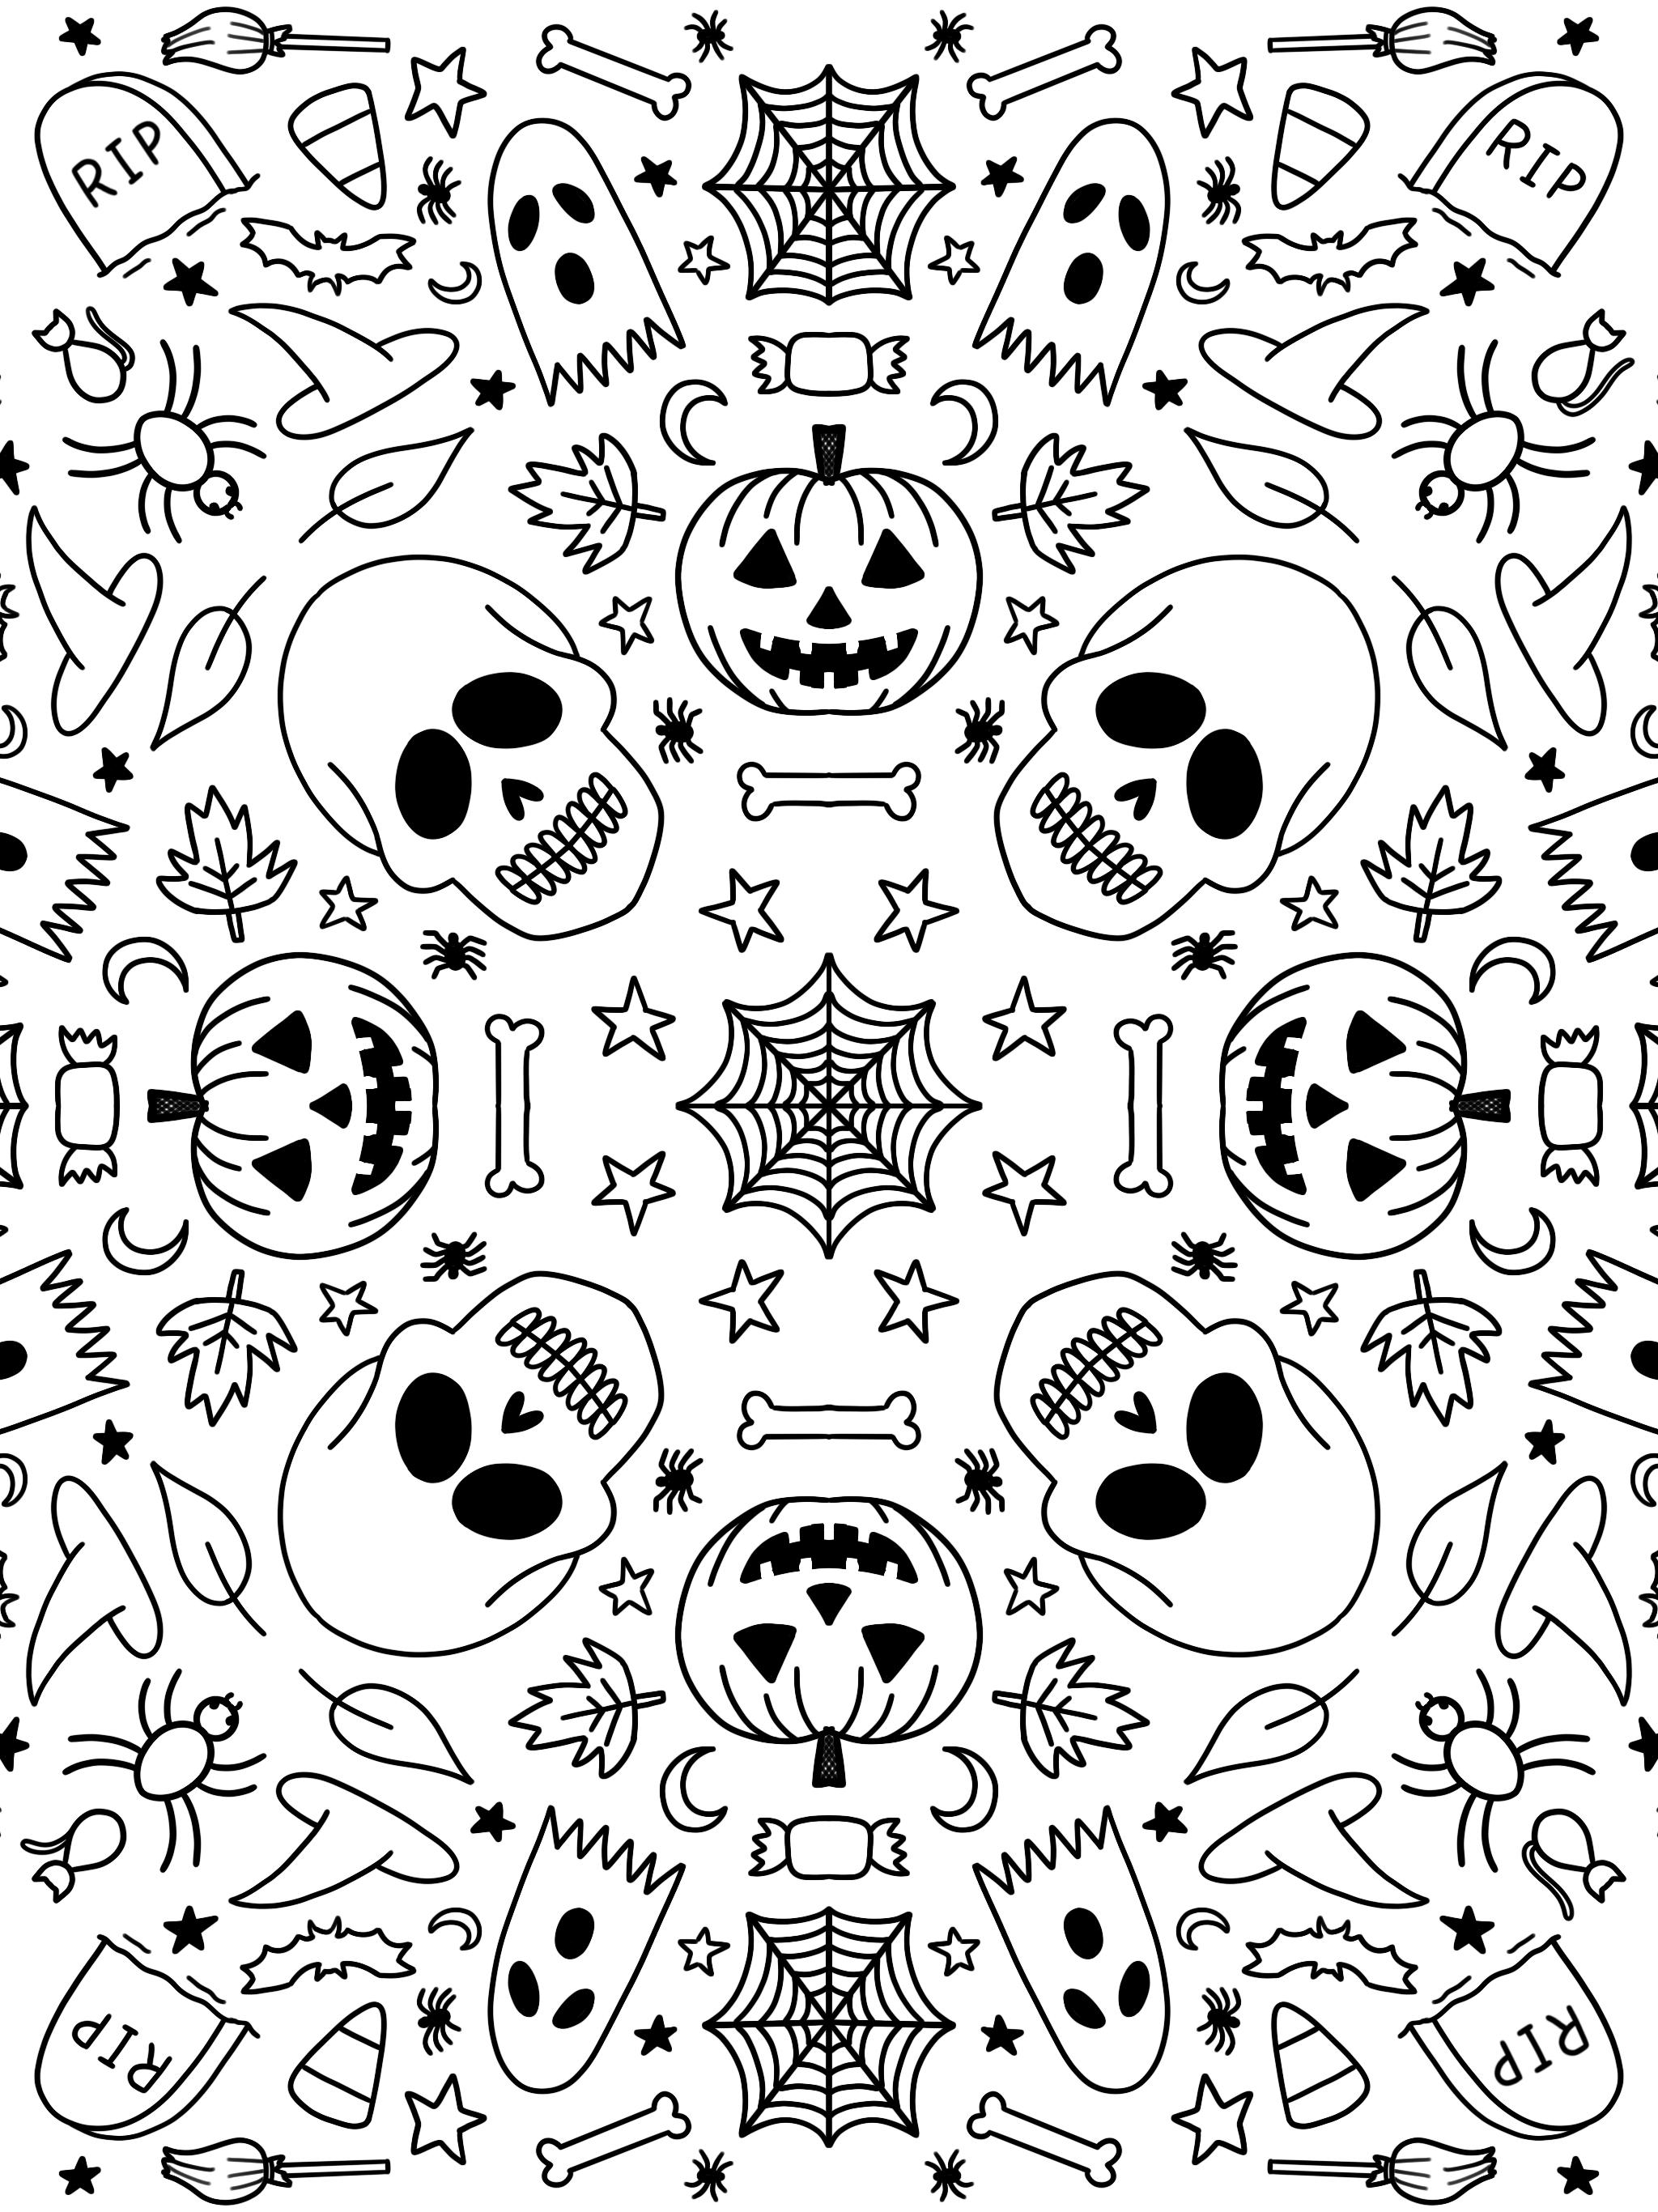 Free Halloween Coloring Pages | Alexis Gentry